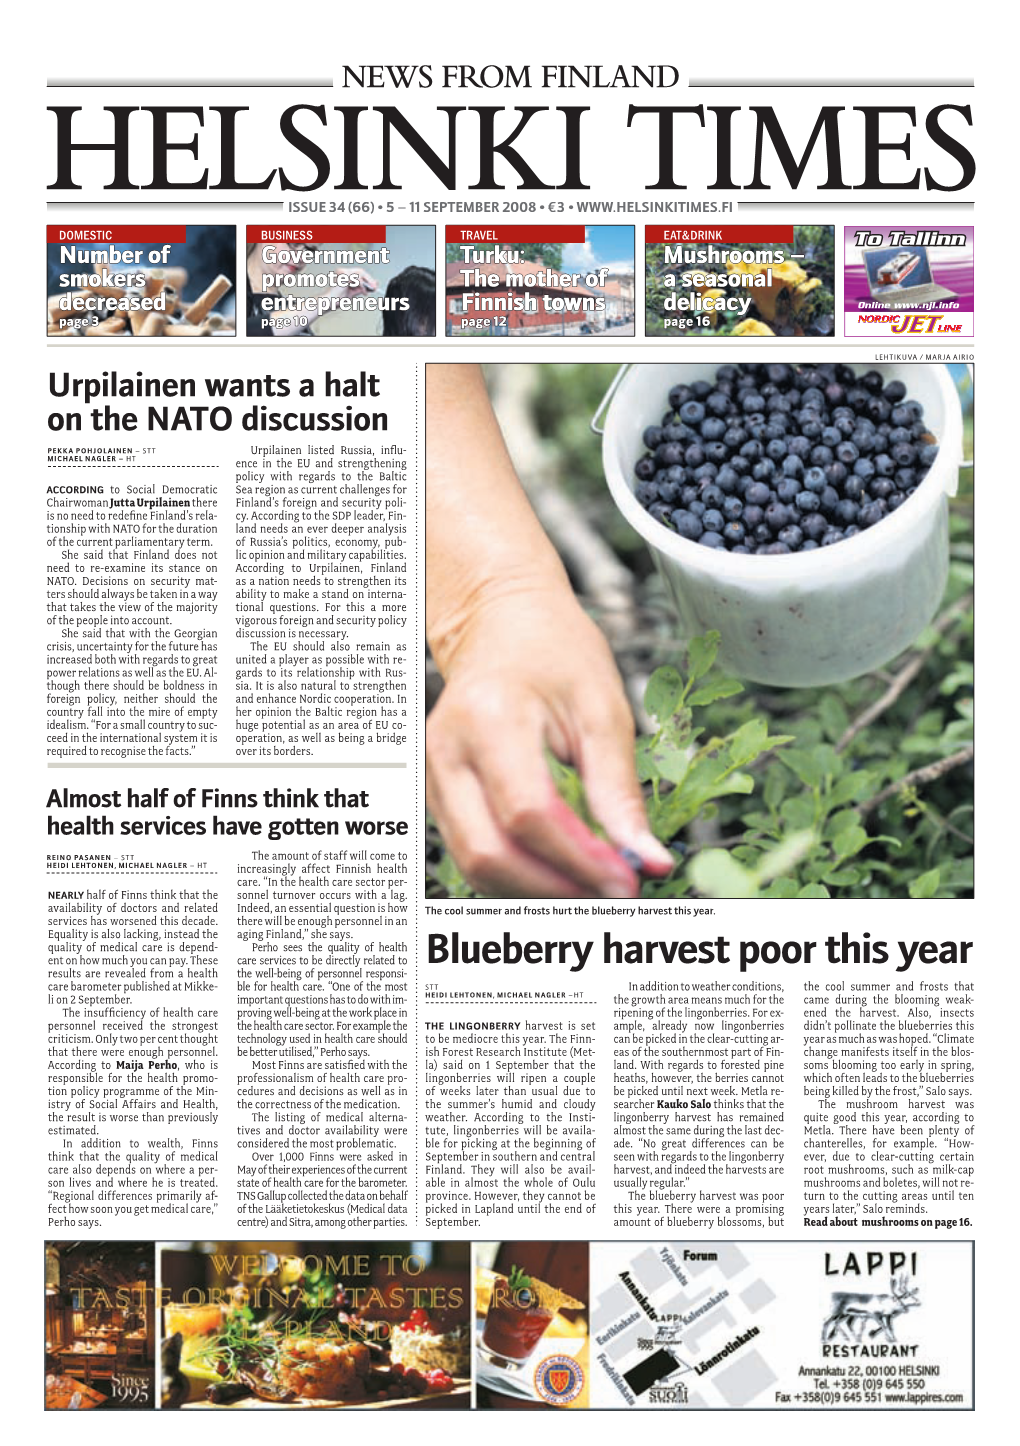 Blueberry Harvest Poor This Year Results Are Revealed from a Health the Well-Being of Personnel Responsi- Care Barometer Published at Mikke- Ble for Health Care